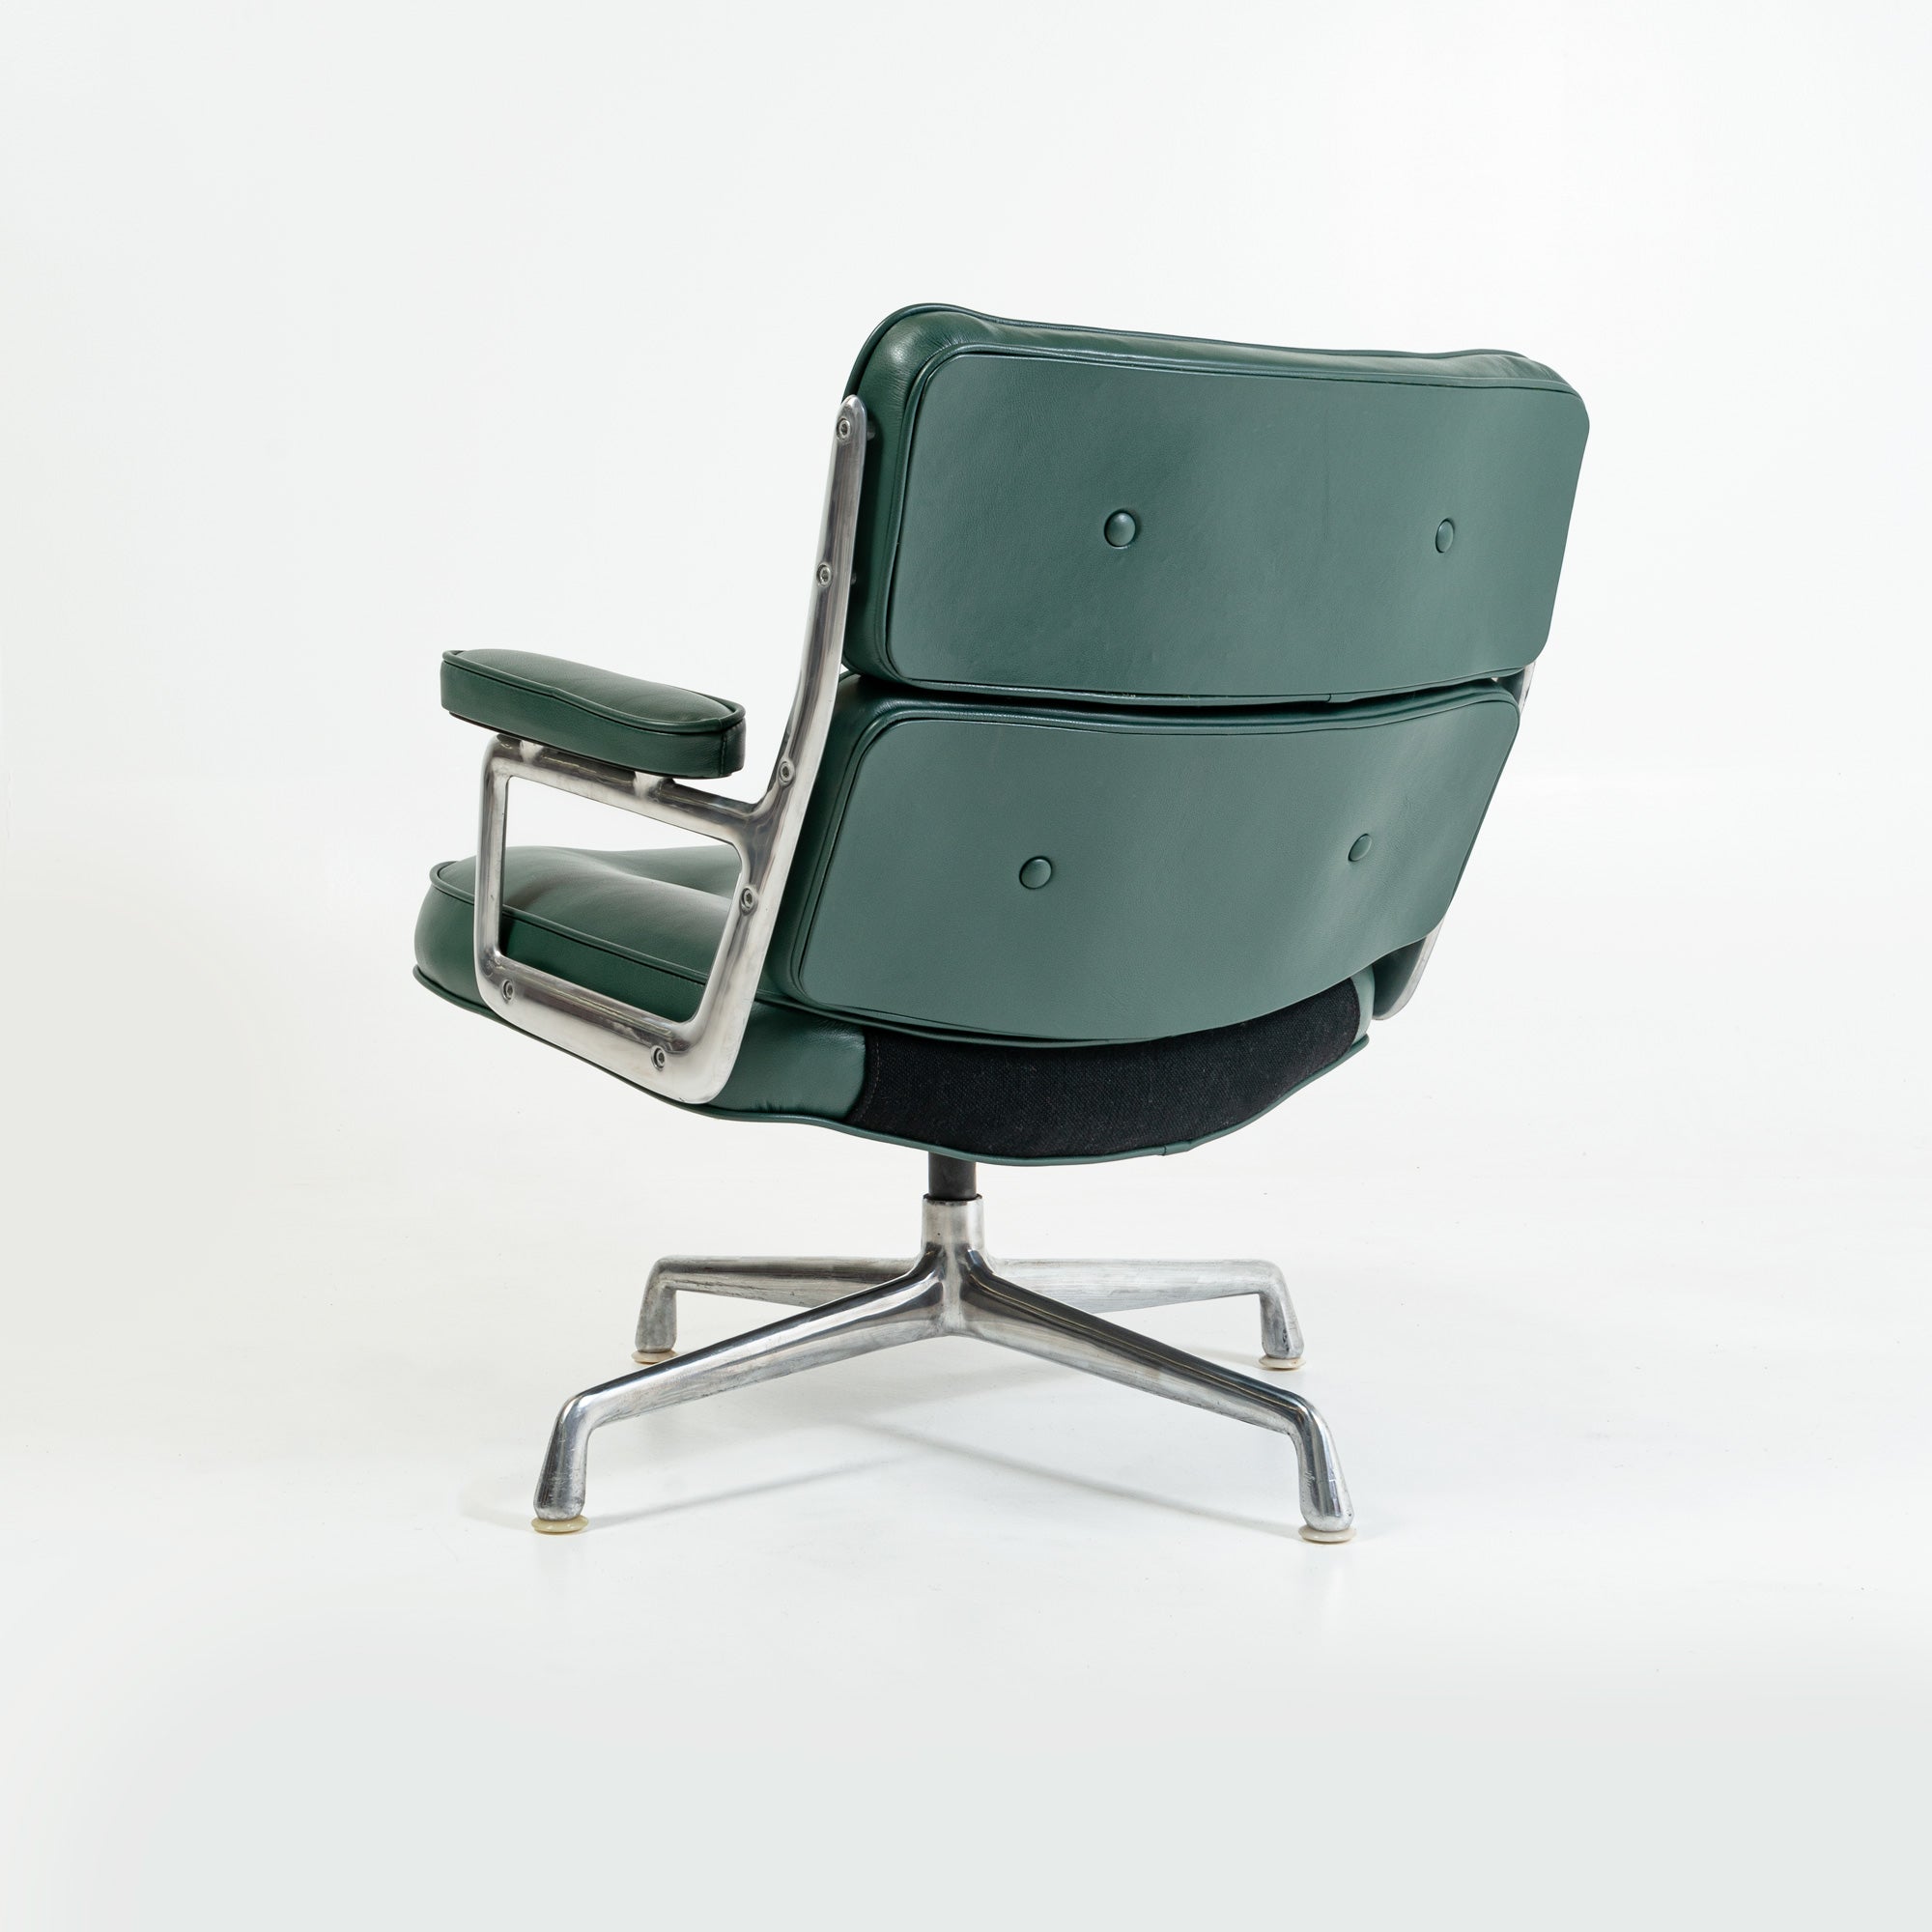 Eames Time Life Lobby Lounge Chair ES105 in Forest Green Leather